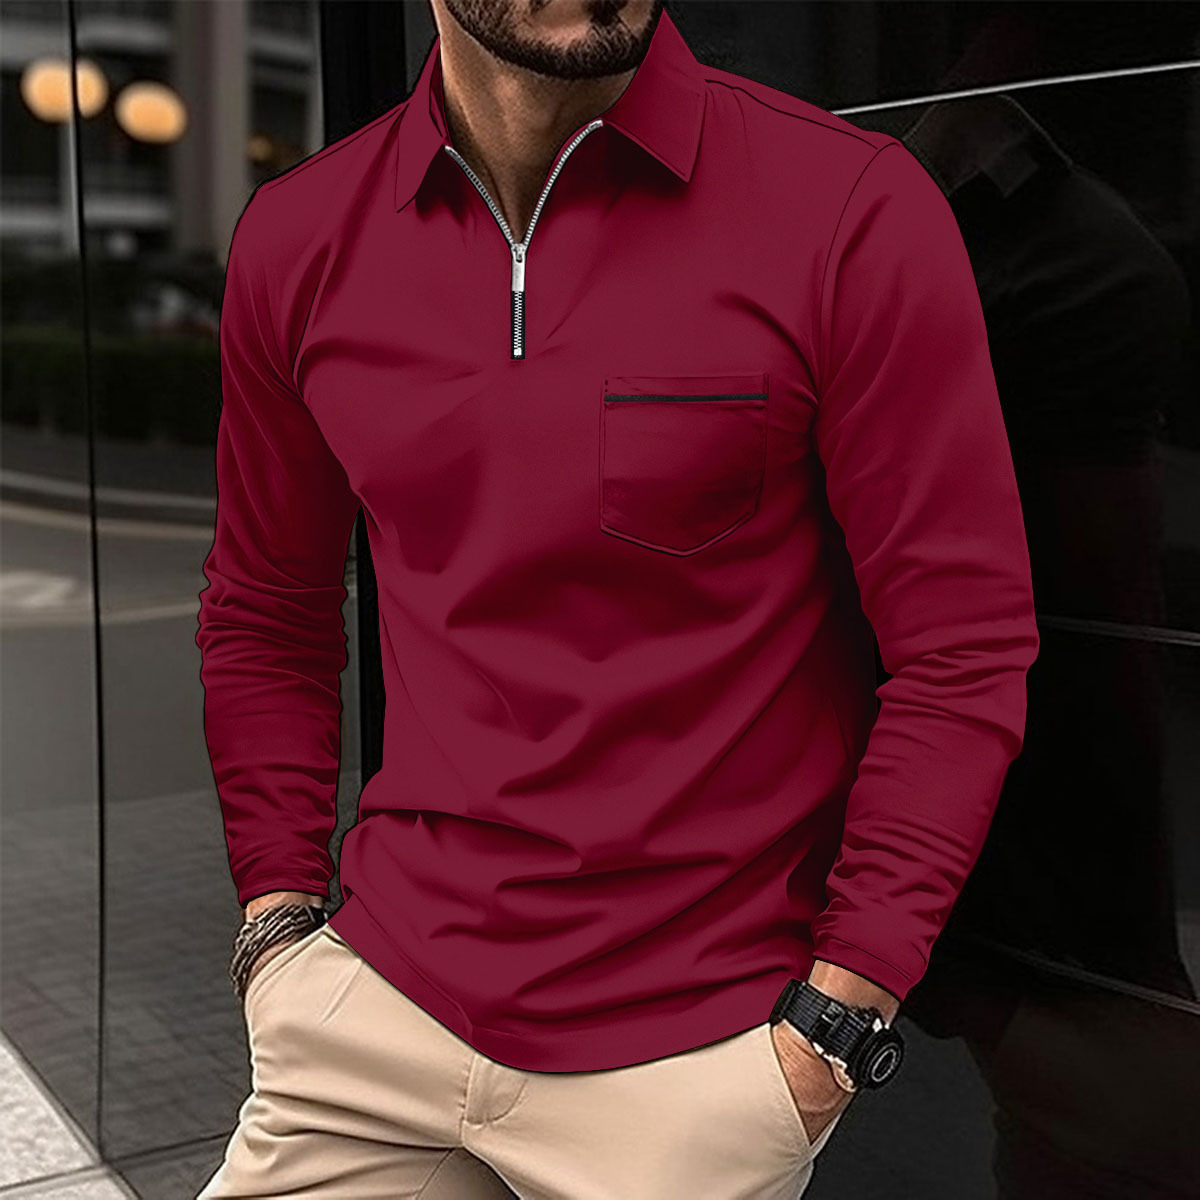 Classic Men's Long-Sleeved Polo Shirt | Chest Pocket with Zip | 1 + 1 Gratis